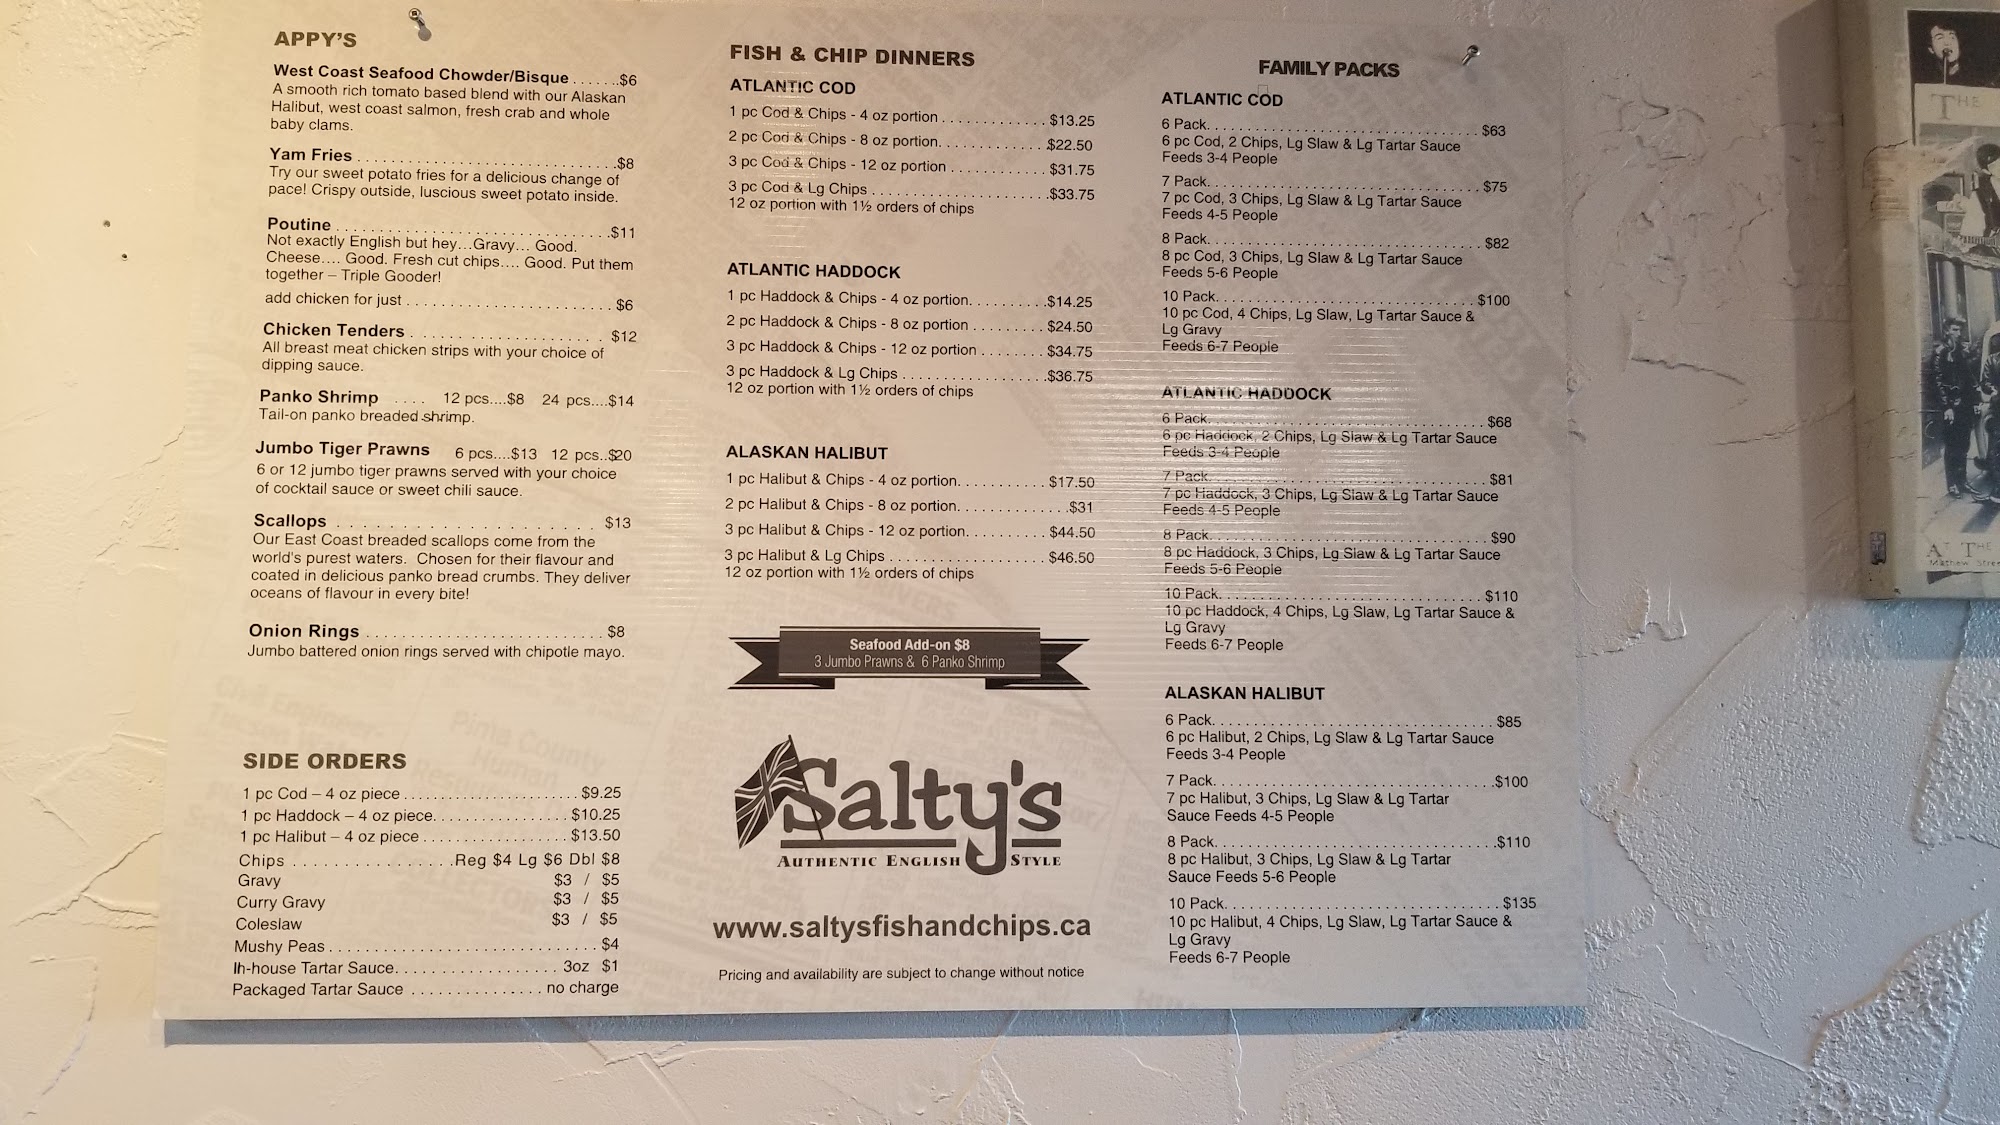 Salty's Fish and Chips